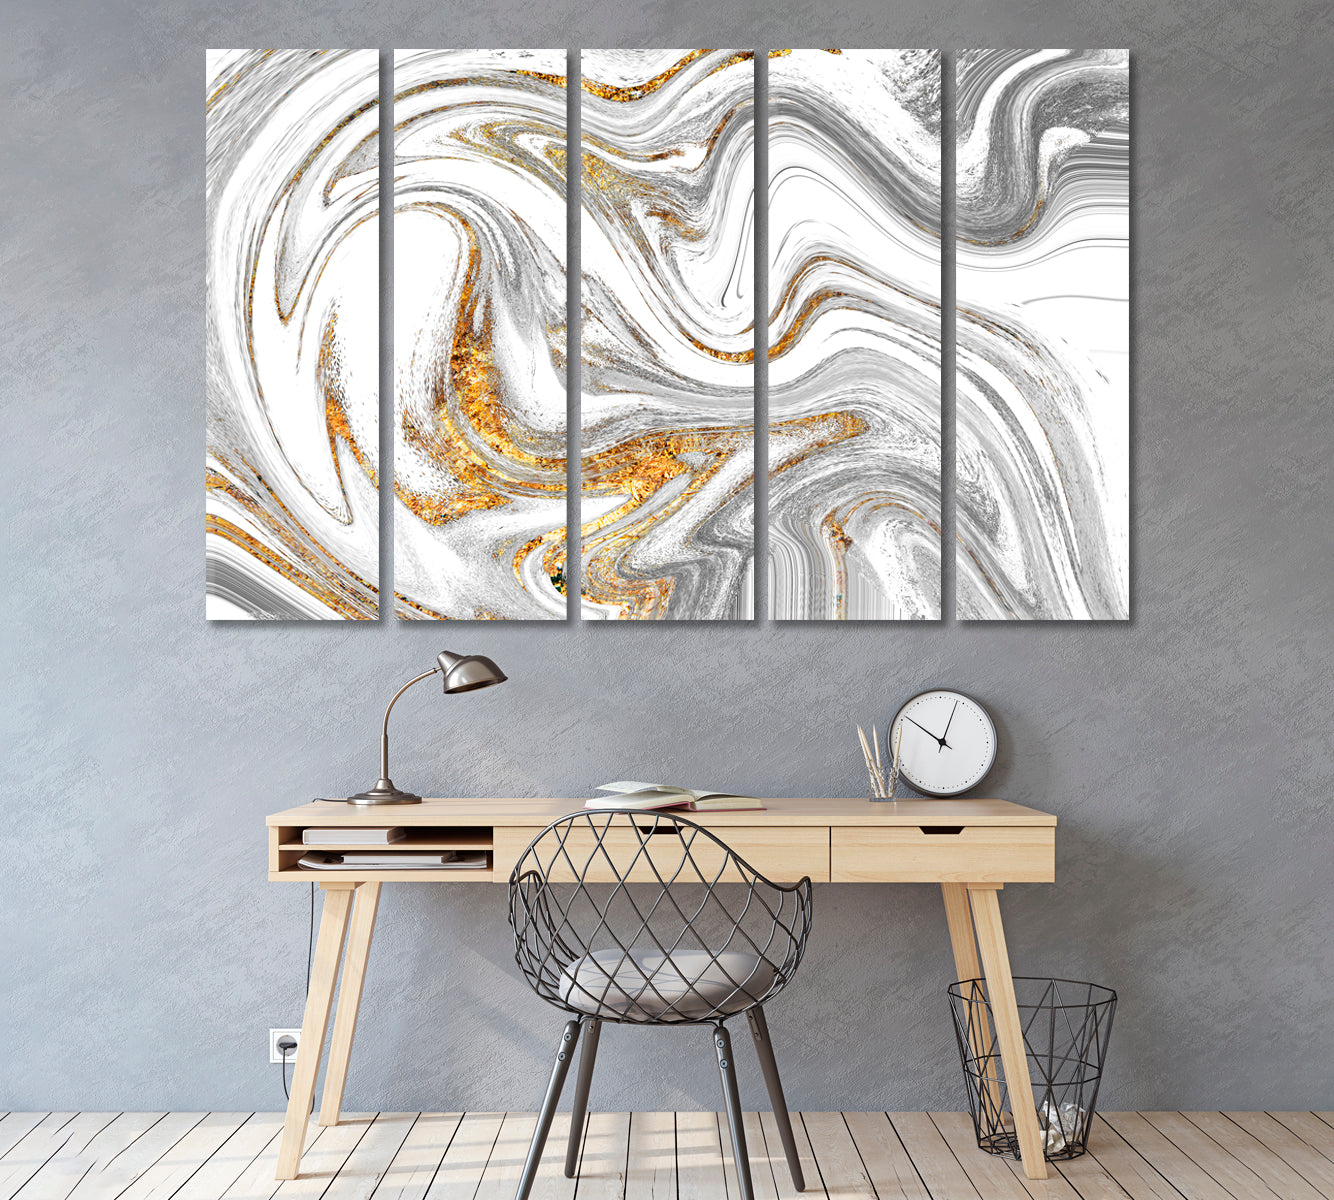 Silver Fluid Marbling Pattern Canvas Print ArtLexy 5 Panels 36"x24" inches 